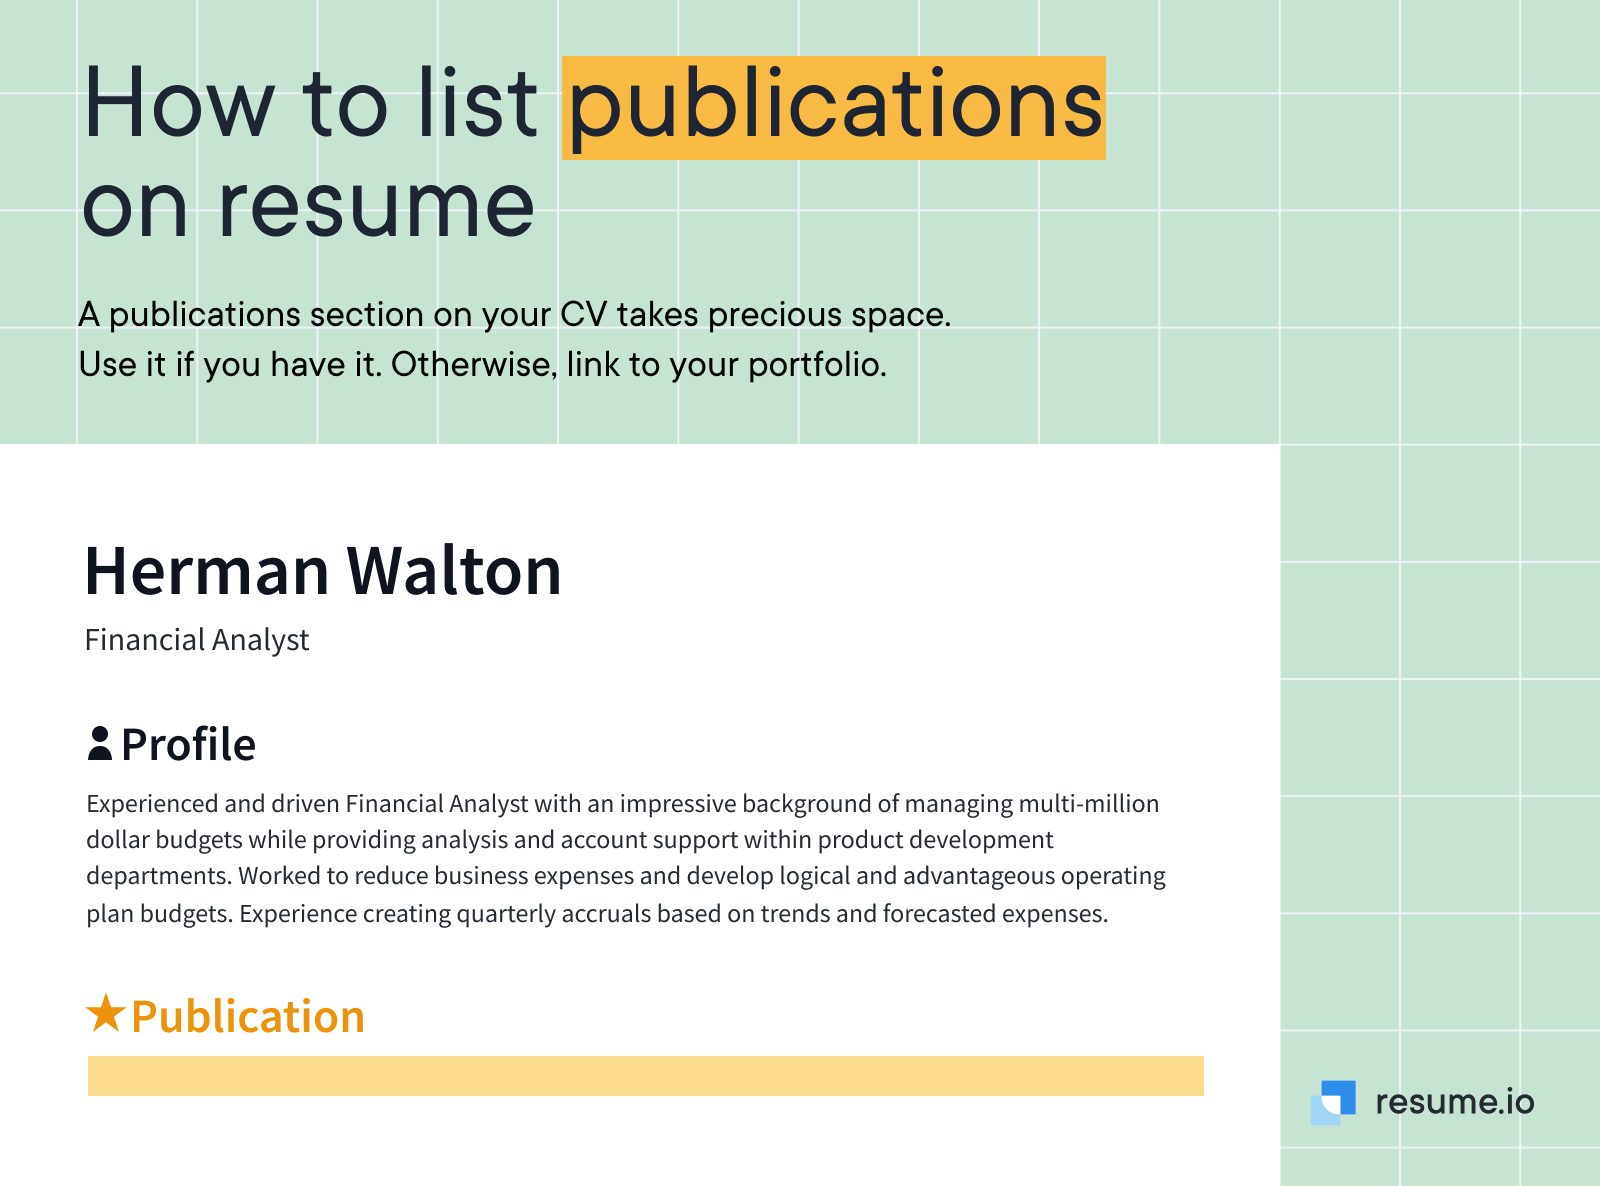 How to list publications on resume